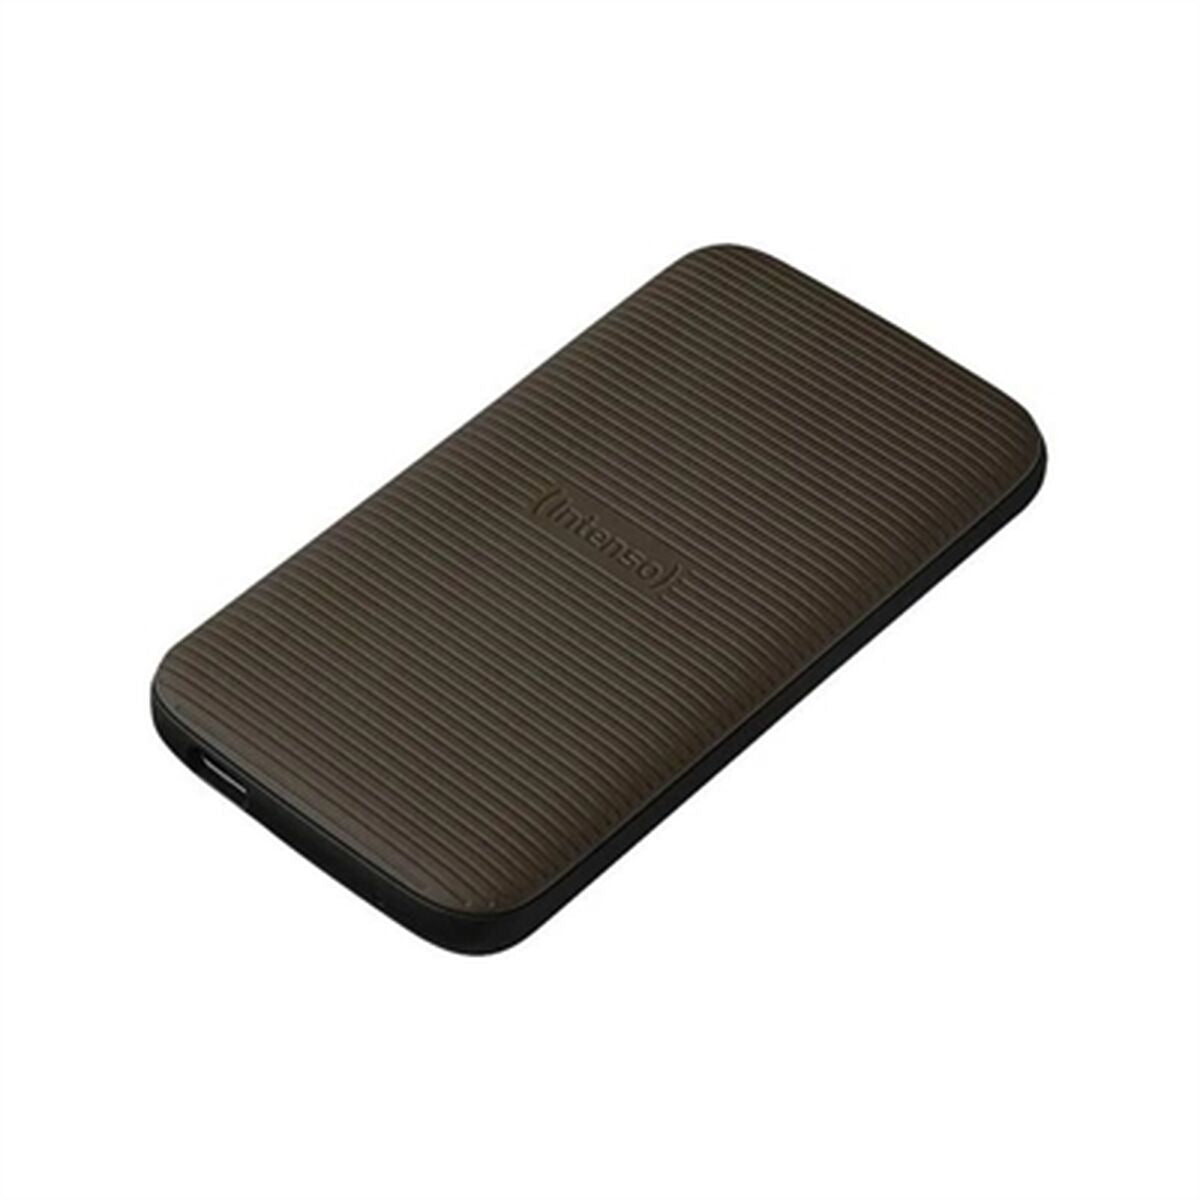 External Hard Drive INTENSO TX500 500 GB, INTENSO, Computing, Data storage, external-hard-drive-intenso-tx500-500-gb, Brand_INTENSO, category-reference-2609, category-reference-2803, category-reference-2806, category-reference-t-19685, category-reference-t-19909, category-reference-t-21355, category-reference-t-25635, Condition_NEW, Price_50 - 100, Teleworking, RiotNook